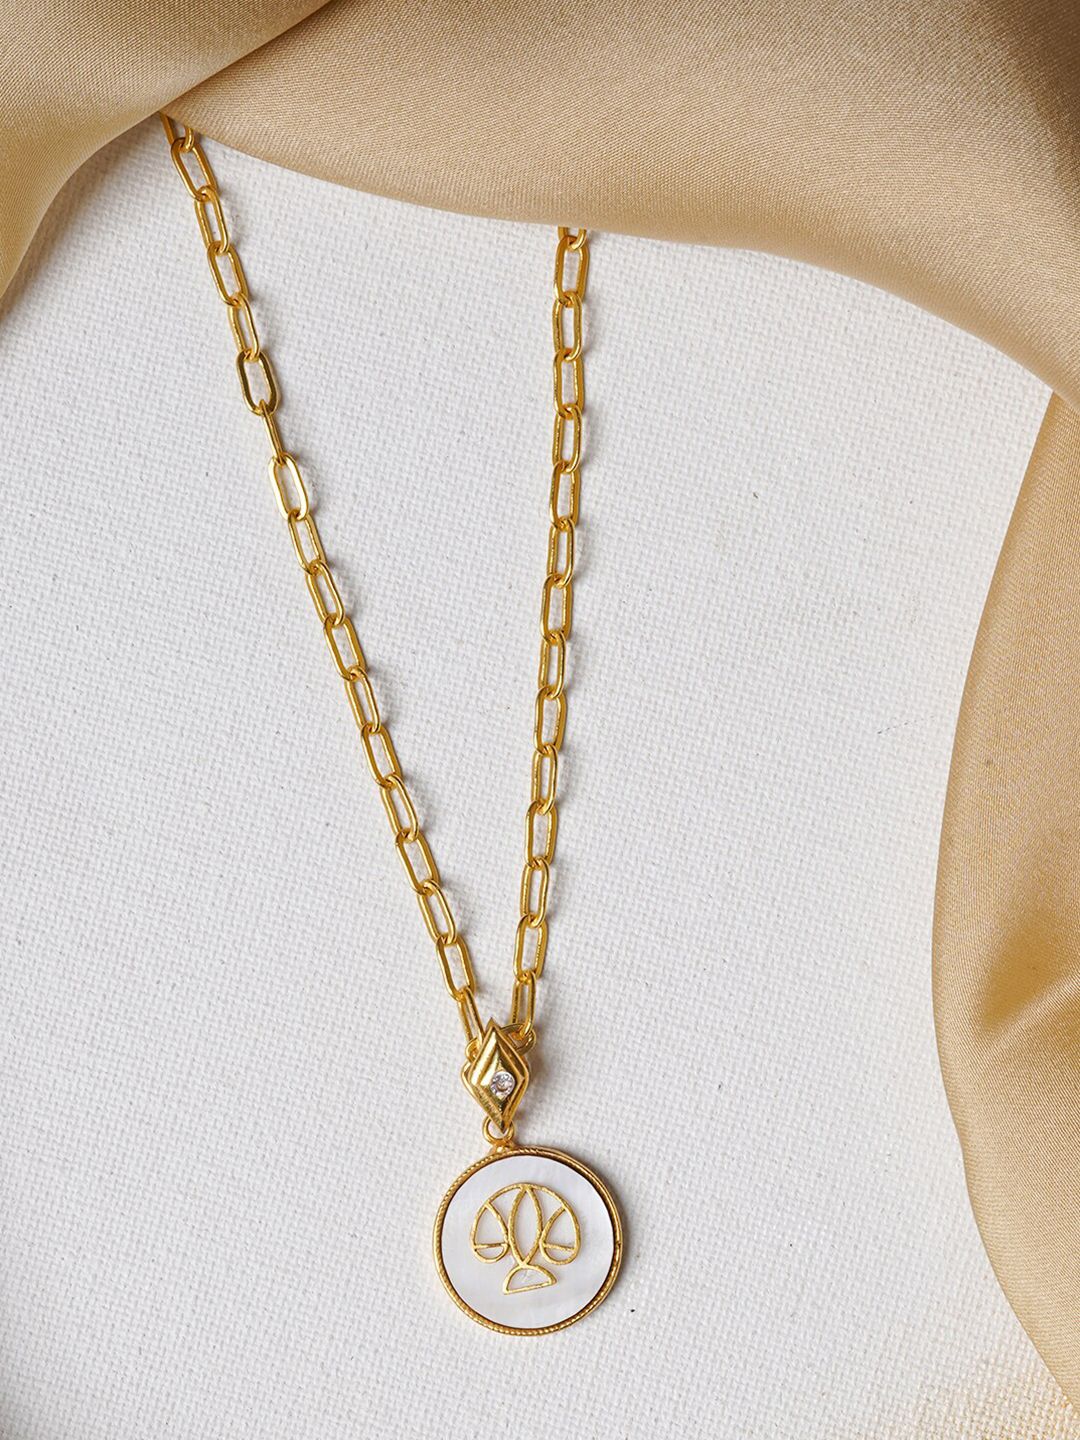 JOKER & WITCH 18K Gold-Plated & White Libra Zodiac Pendant Handcrafted Necklace Price in India